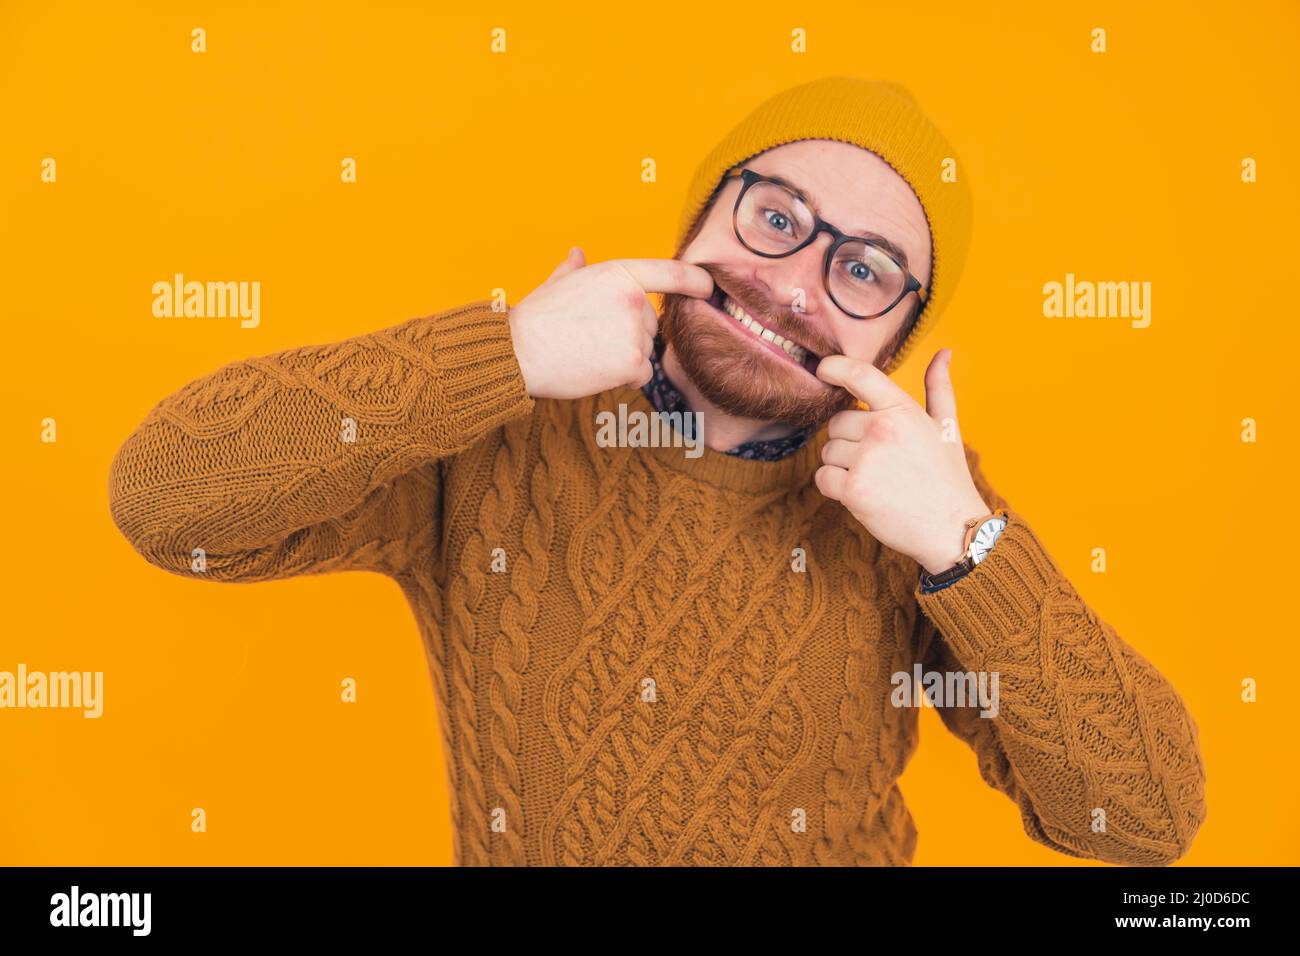 young caucasian man making a goofy face by widening his face with his own fingers. High quality photo Stock Photo